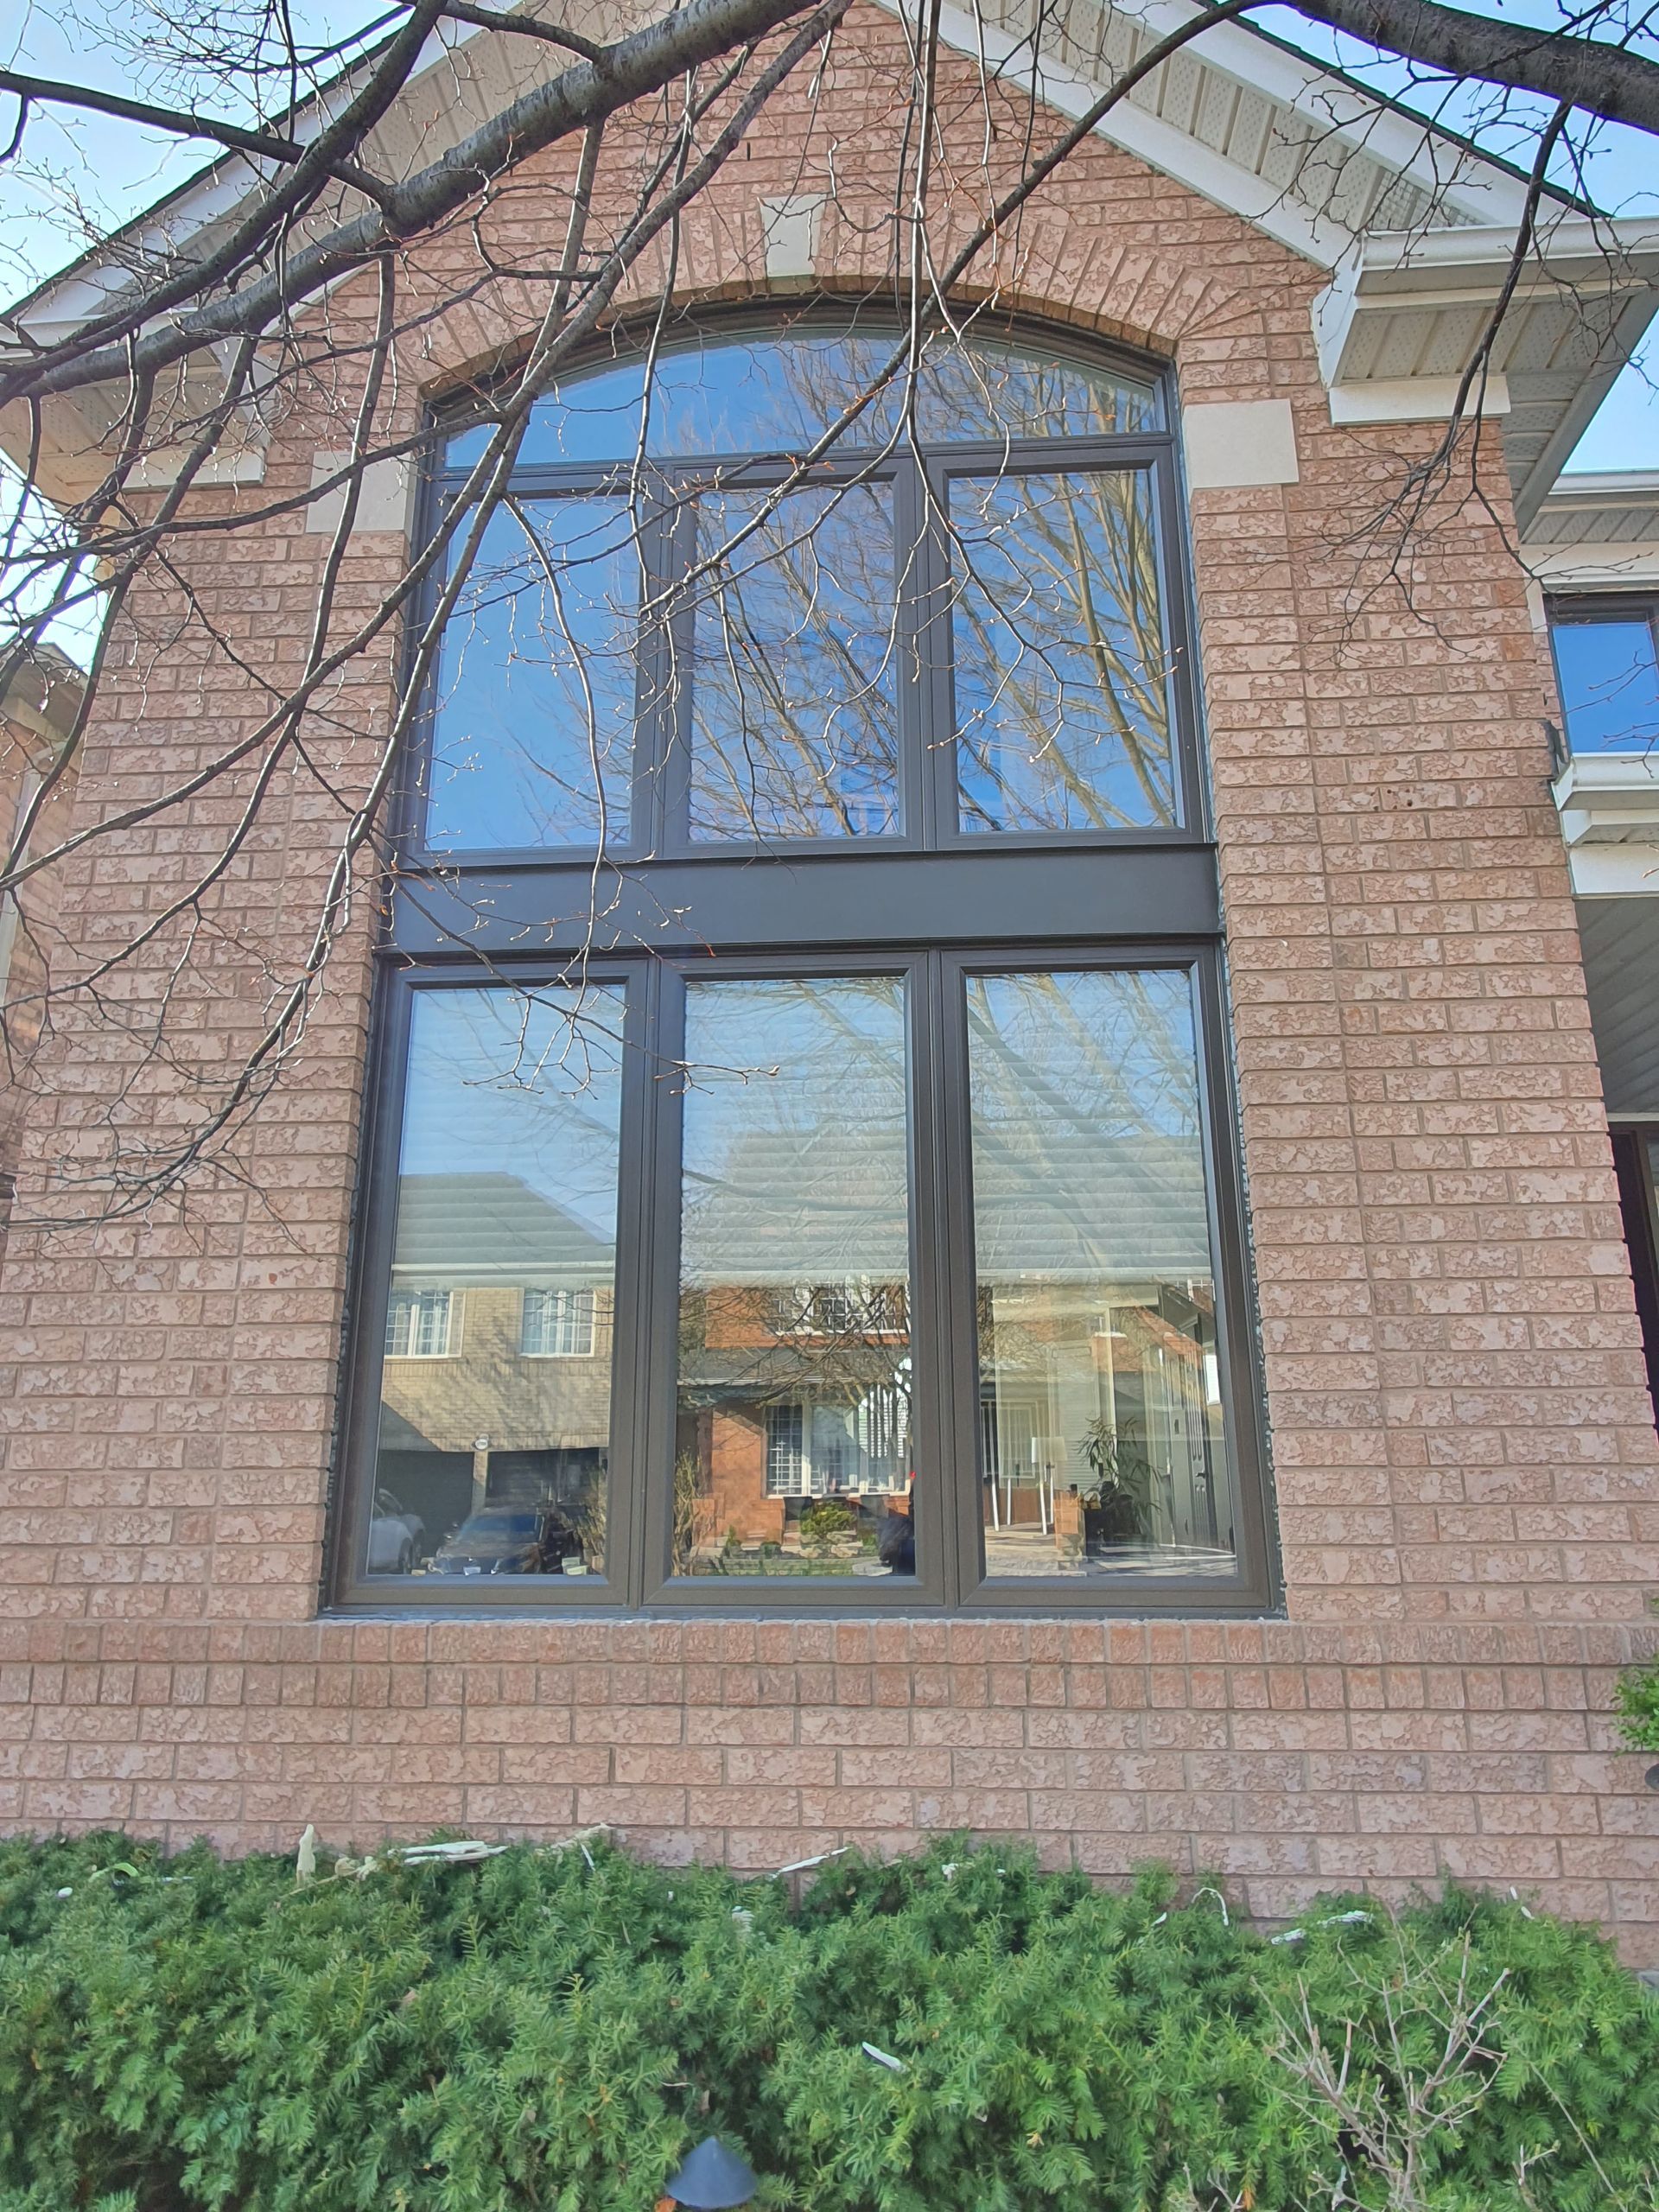 a large window on the side of a brick building